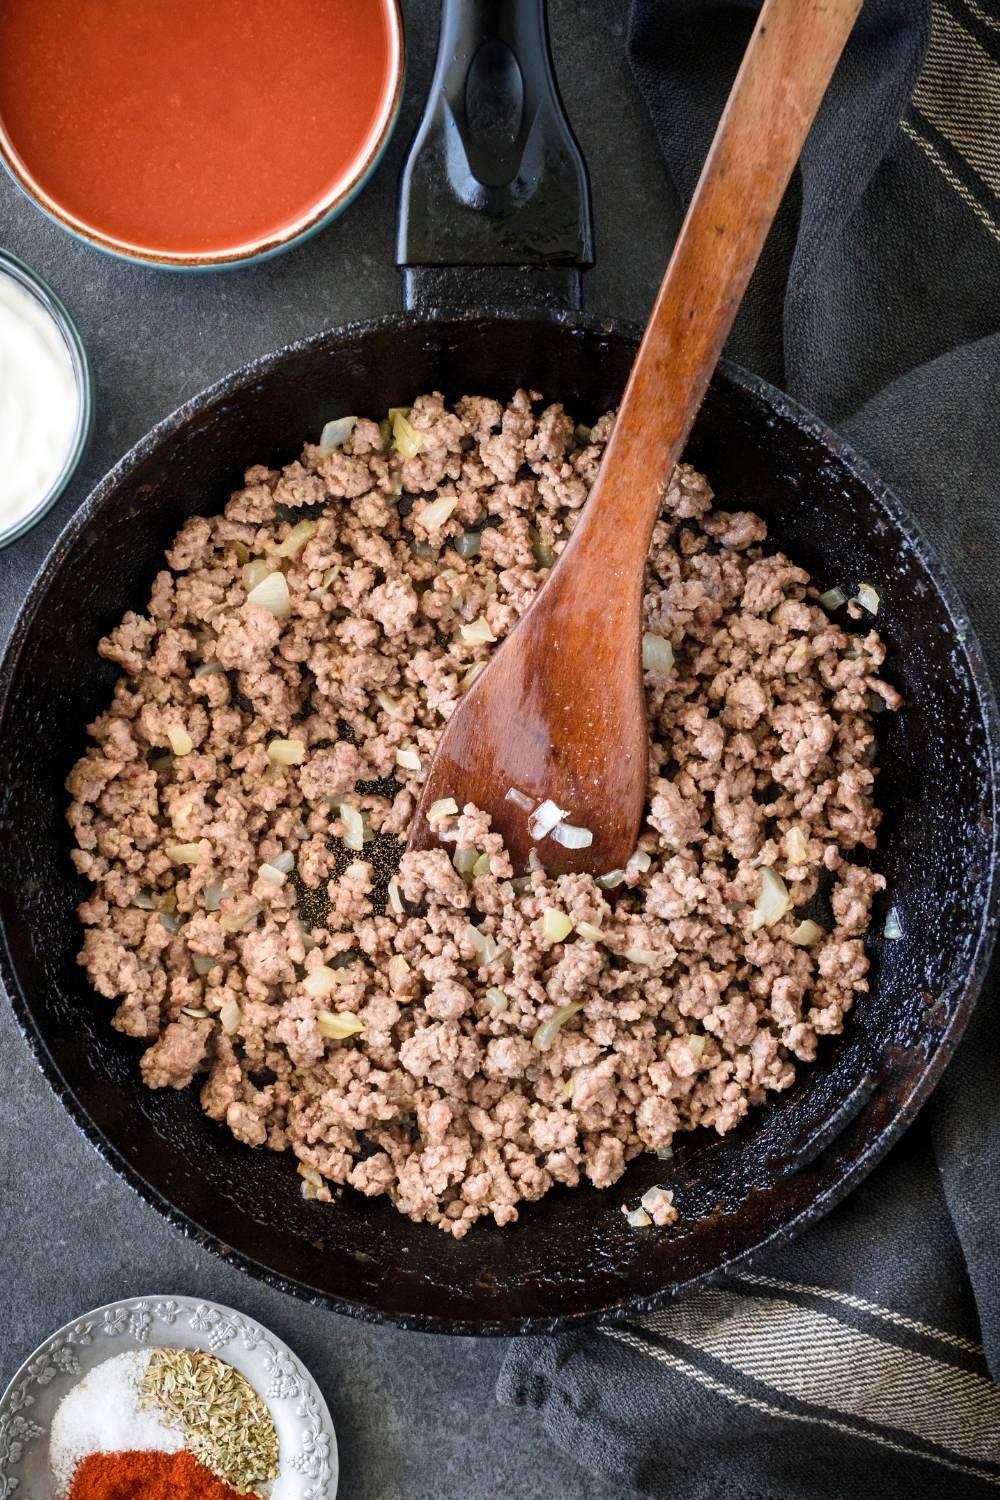 A skillet filled with diced onion and ground beef being stirred using a wooden spoon.